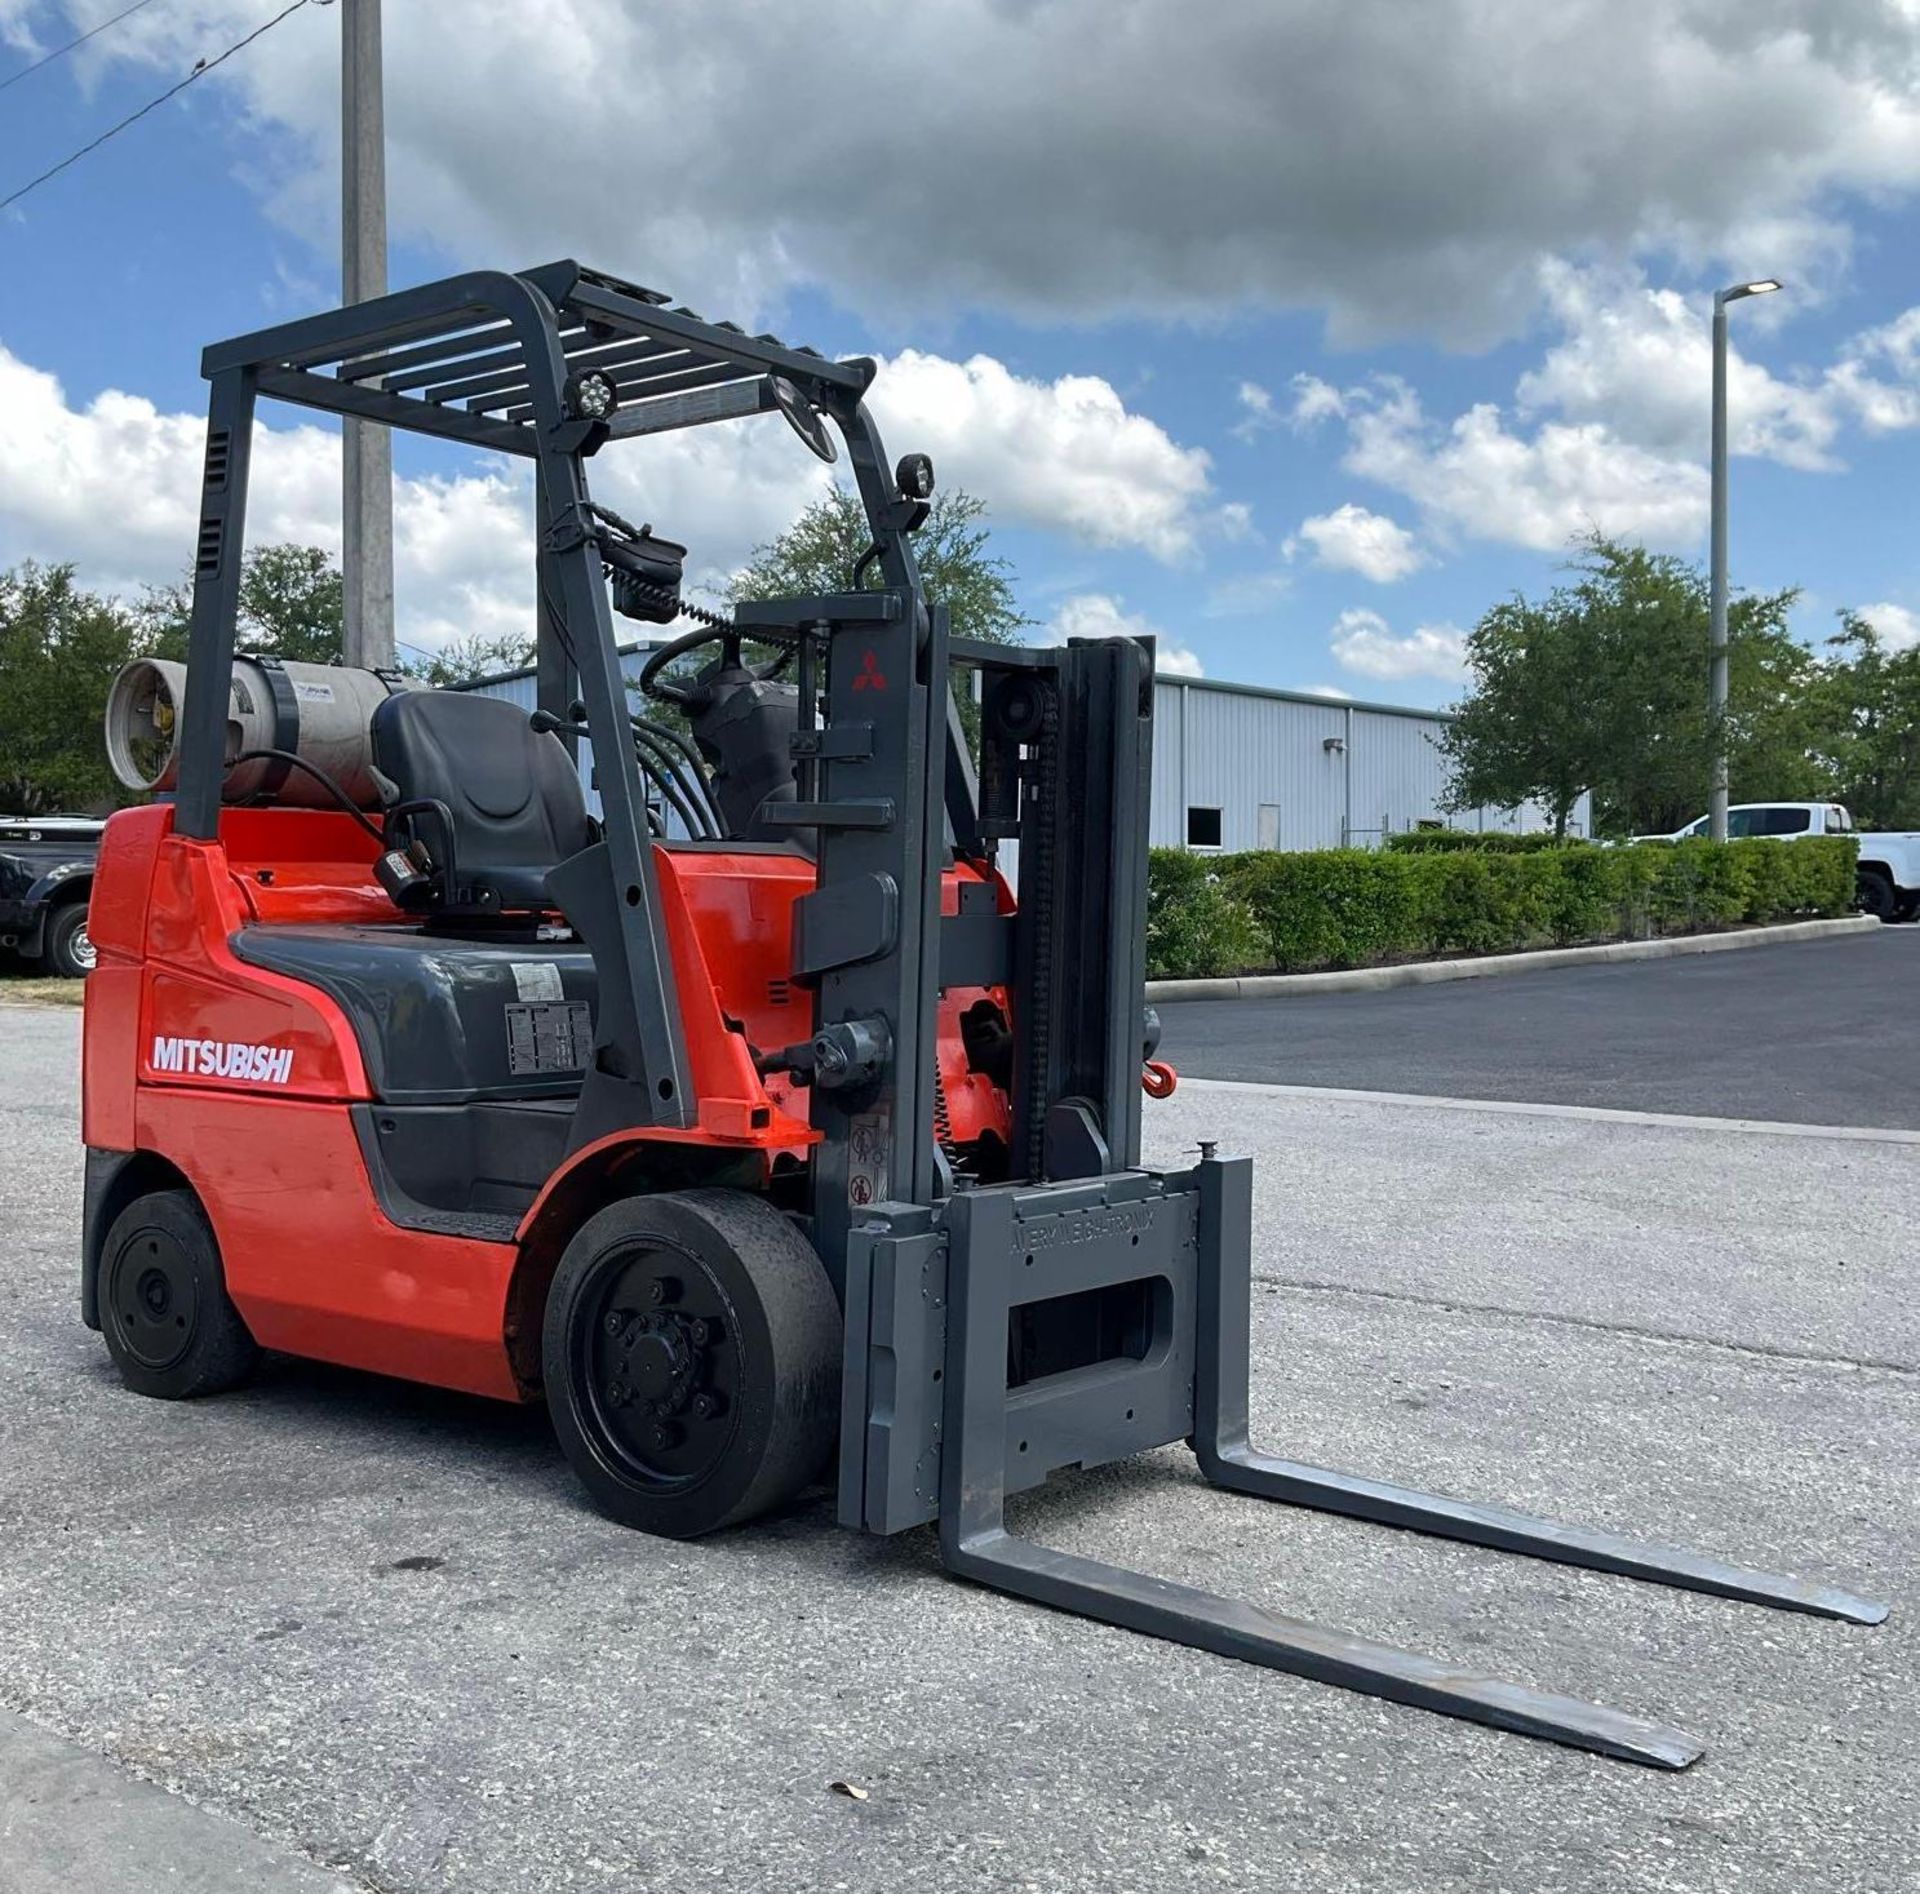 MITSUBISHI FORKLIFT MODEL FGC25N-LP, LP POWERED, APPROX MAX CAPACITY 5000LBS - Image 2 of 13